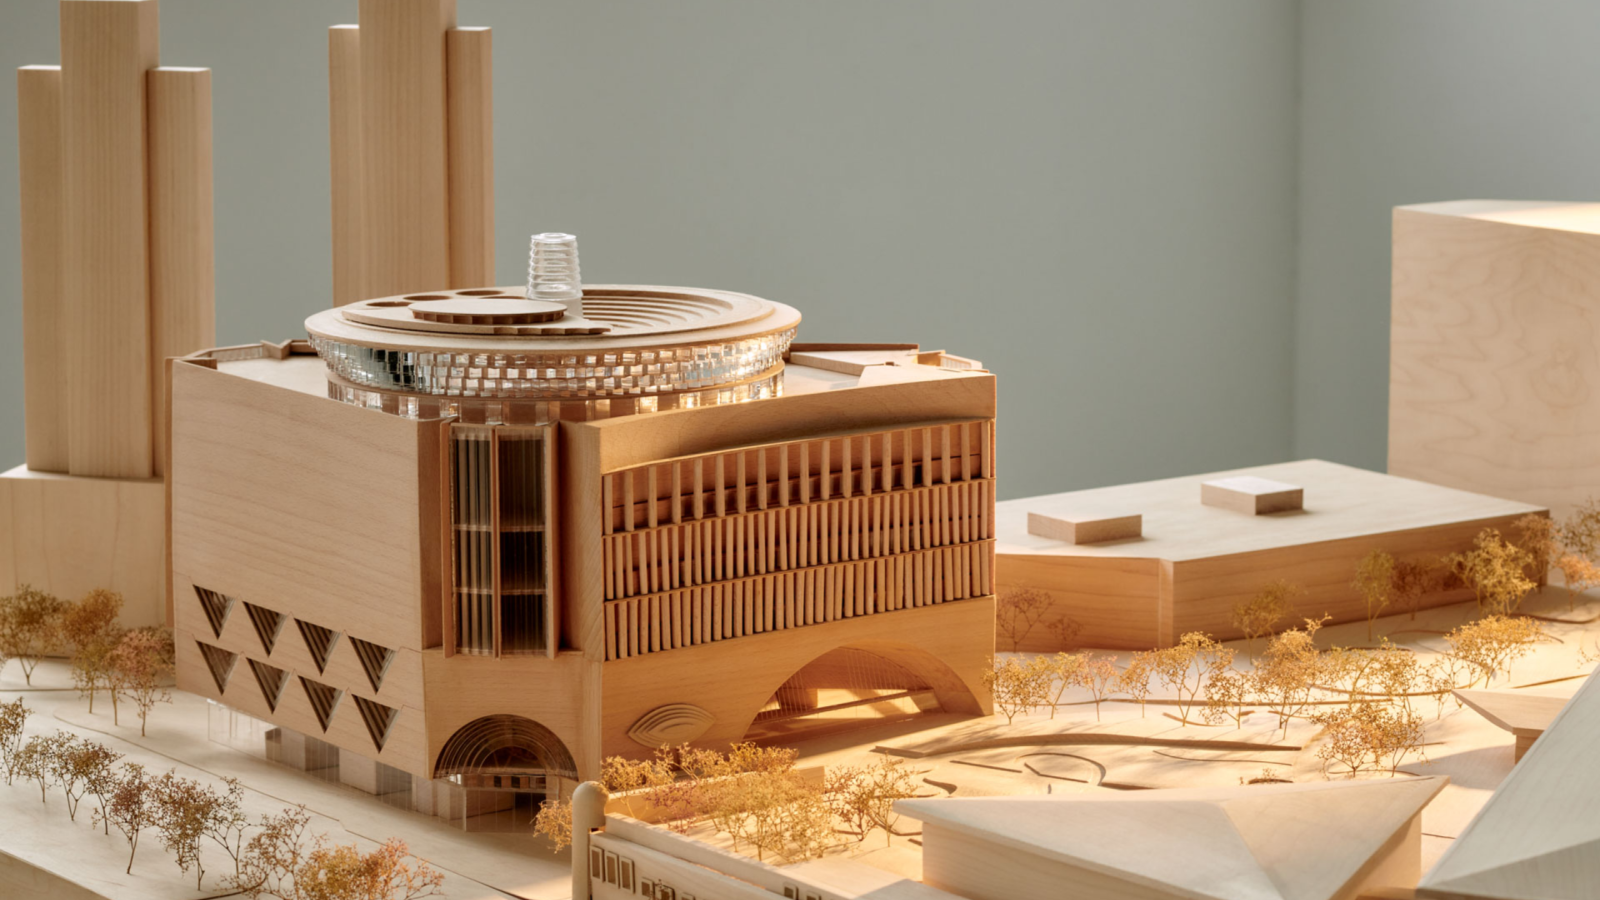 Competition_Model_NGV_Candalepus_Associates_13